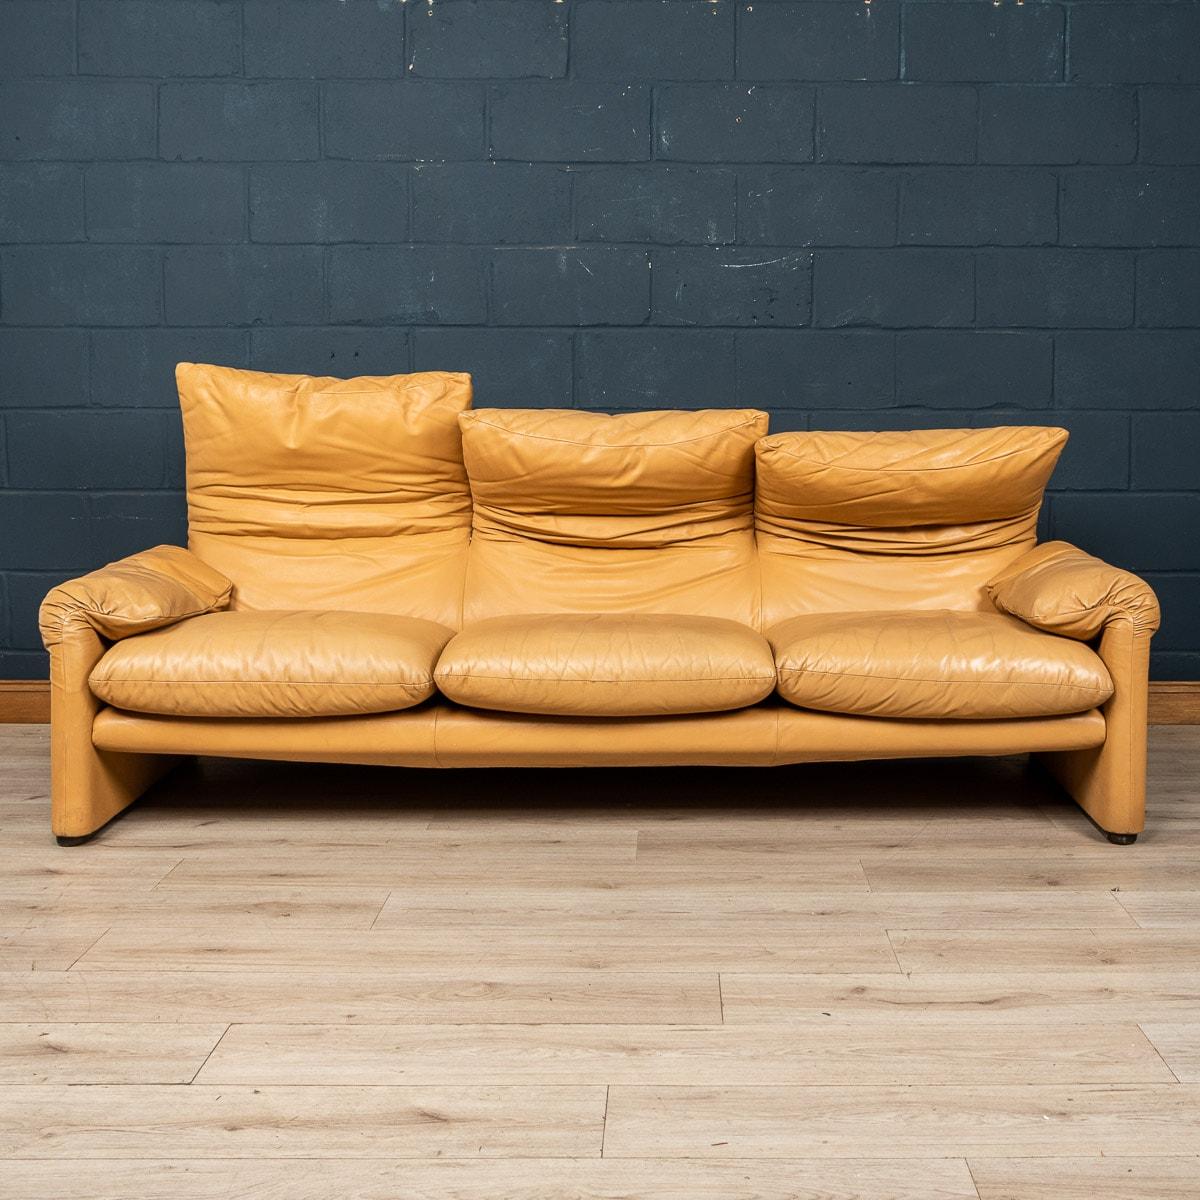 A large 3-seater “675 Maralunga” sofa in original beige leather upholstery. The Maralunga sofa was designed by Vico Magistretti in the early 1970s for Cassina. Cosy and adaptable, the ever cool sofa was an instant classic. Comfort comes in 2 forms